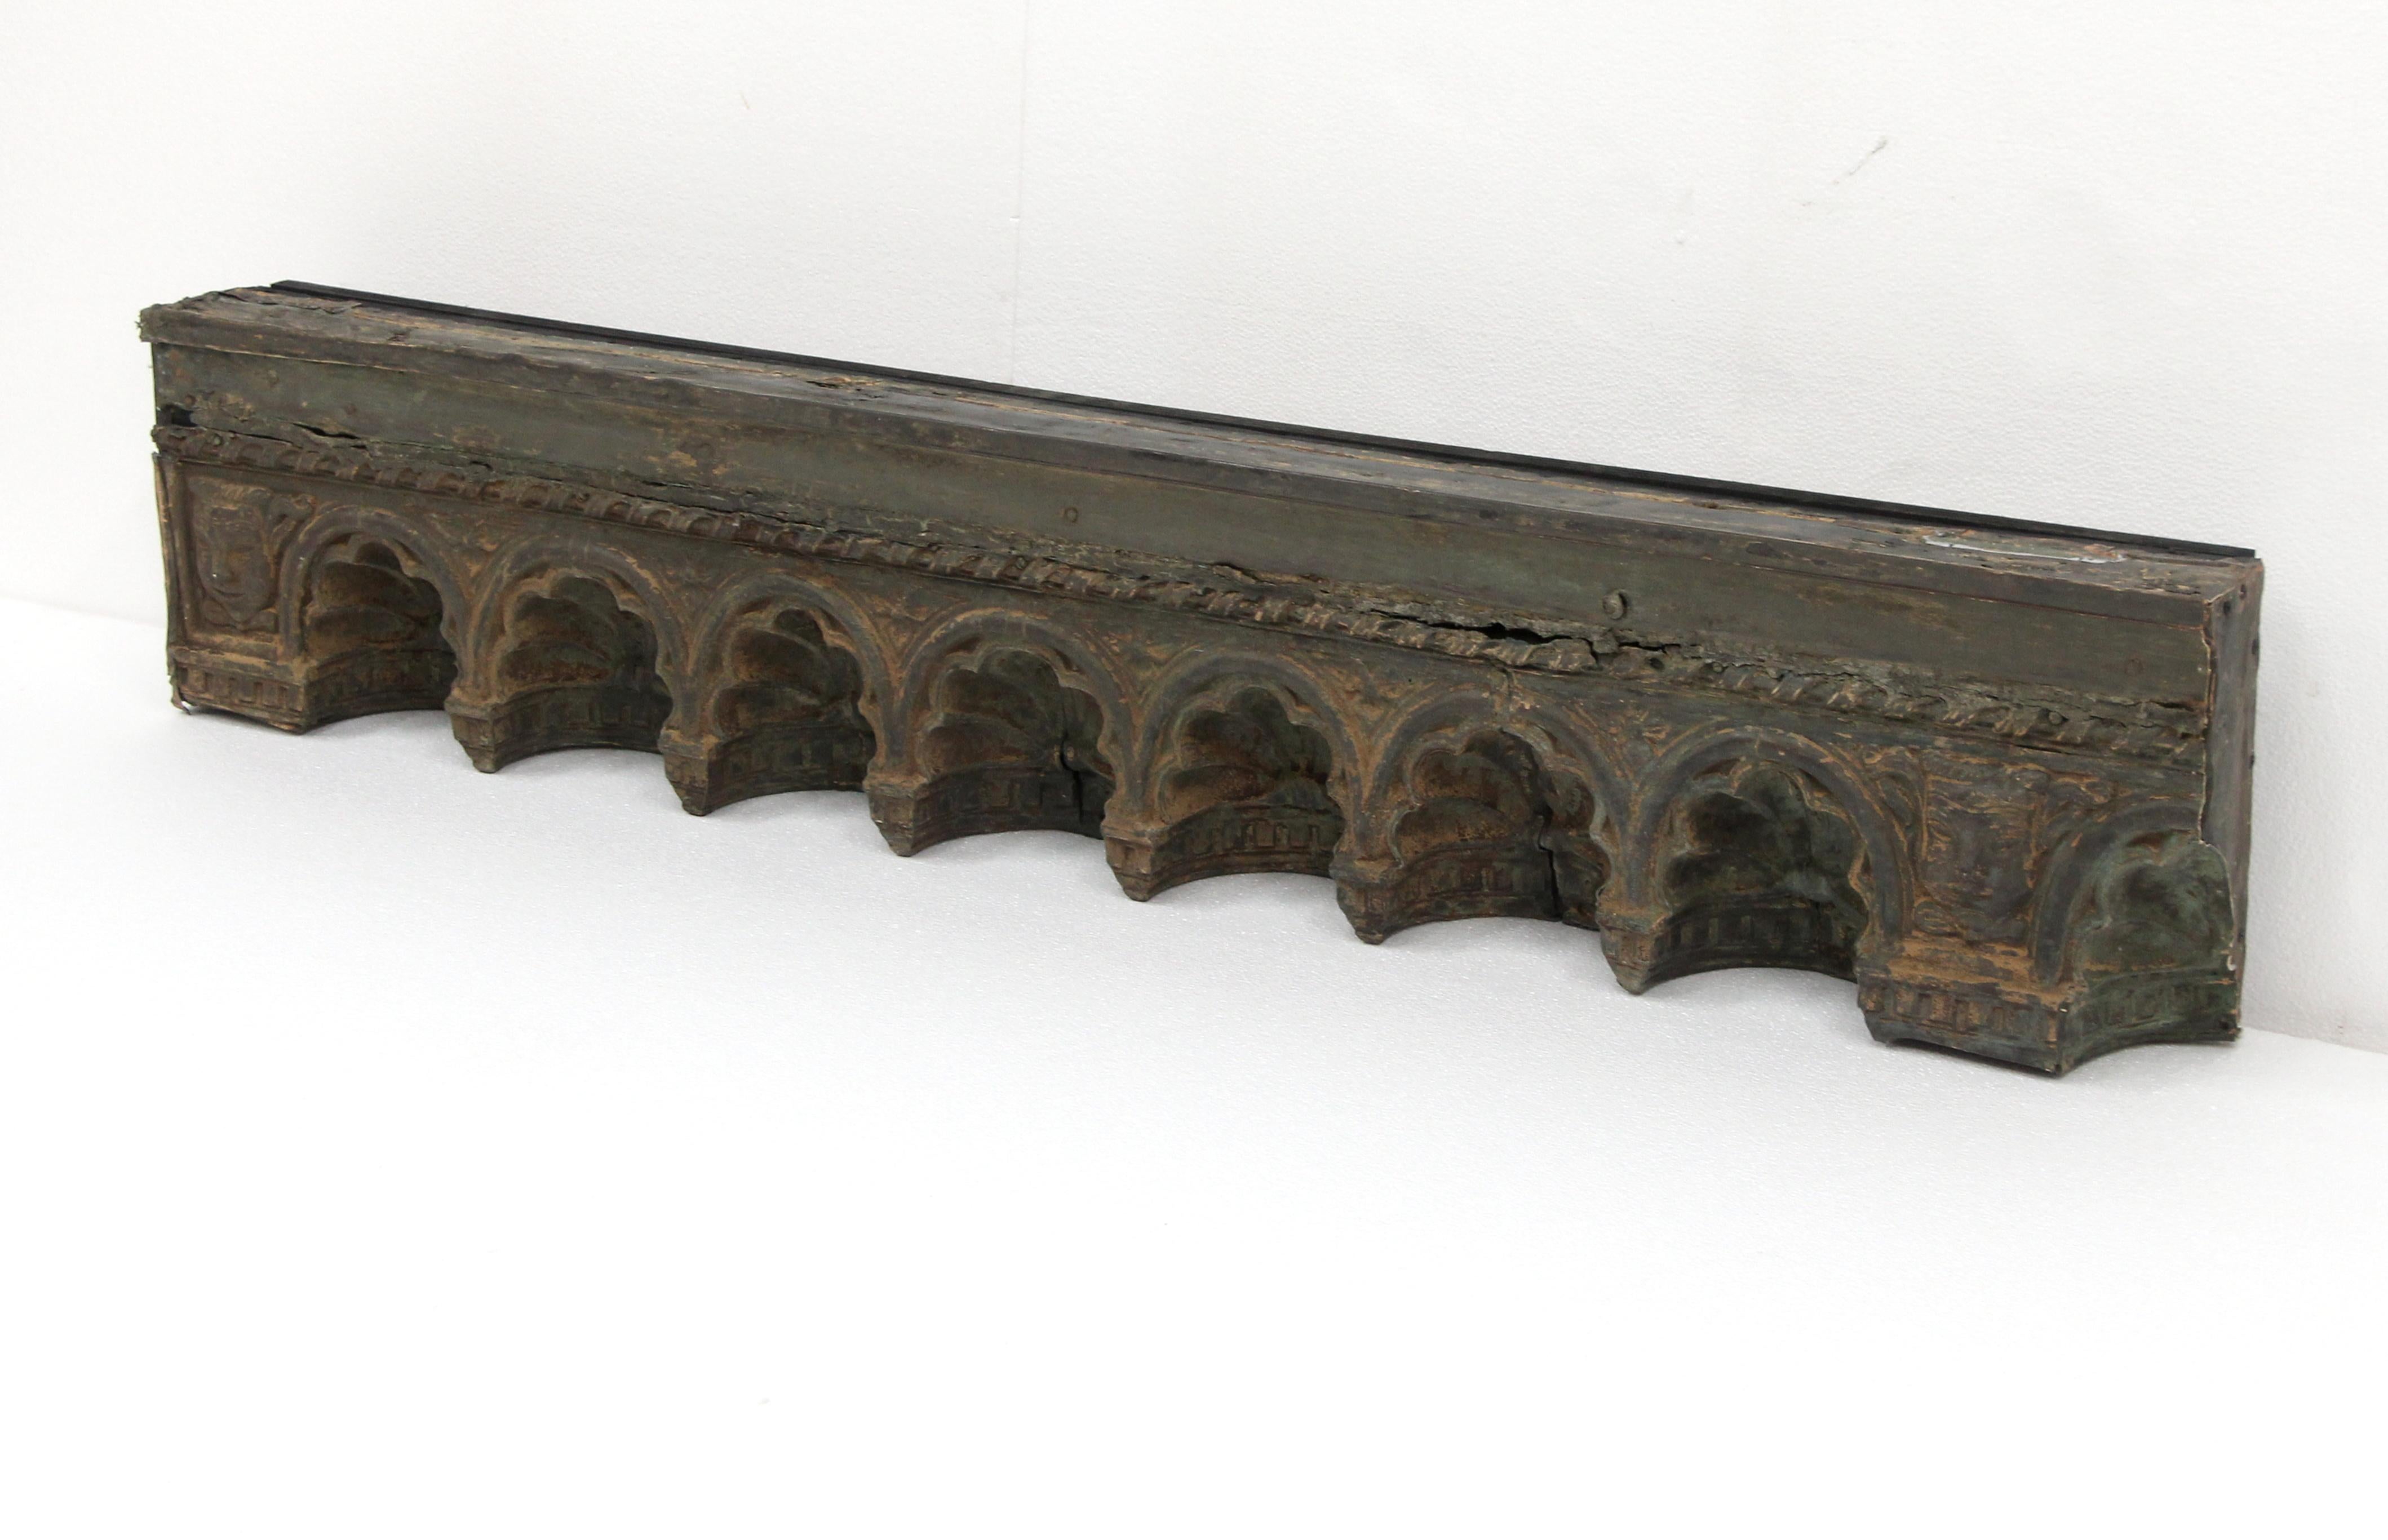 Reclaimed section of roof cornice from the 1921 Crown Building on West 57th Street in New York City now made into a wall hanging or shelf. The Crown Building was designed by Warren and Wetmore who also designed the Helmsley Building and Grand